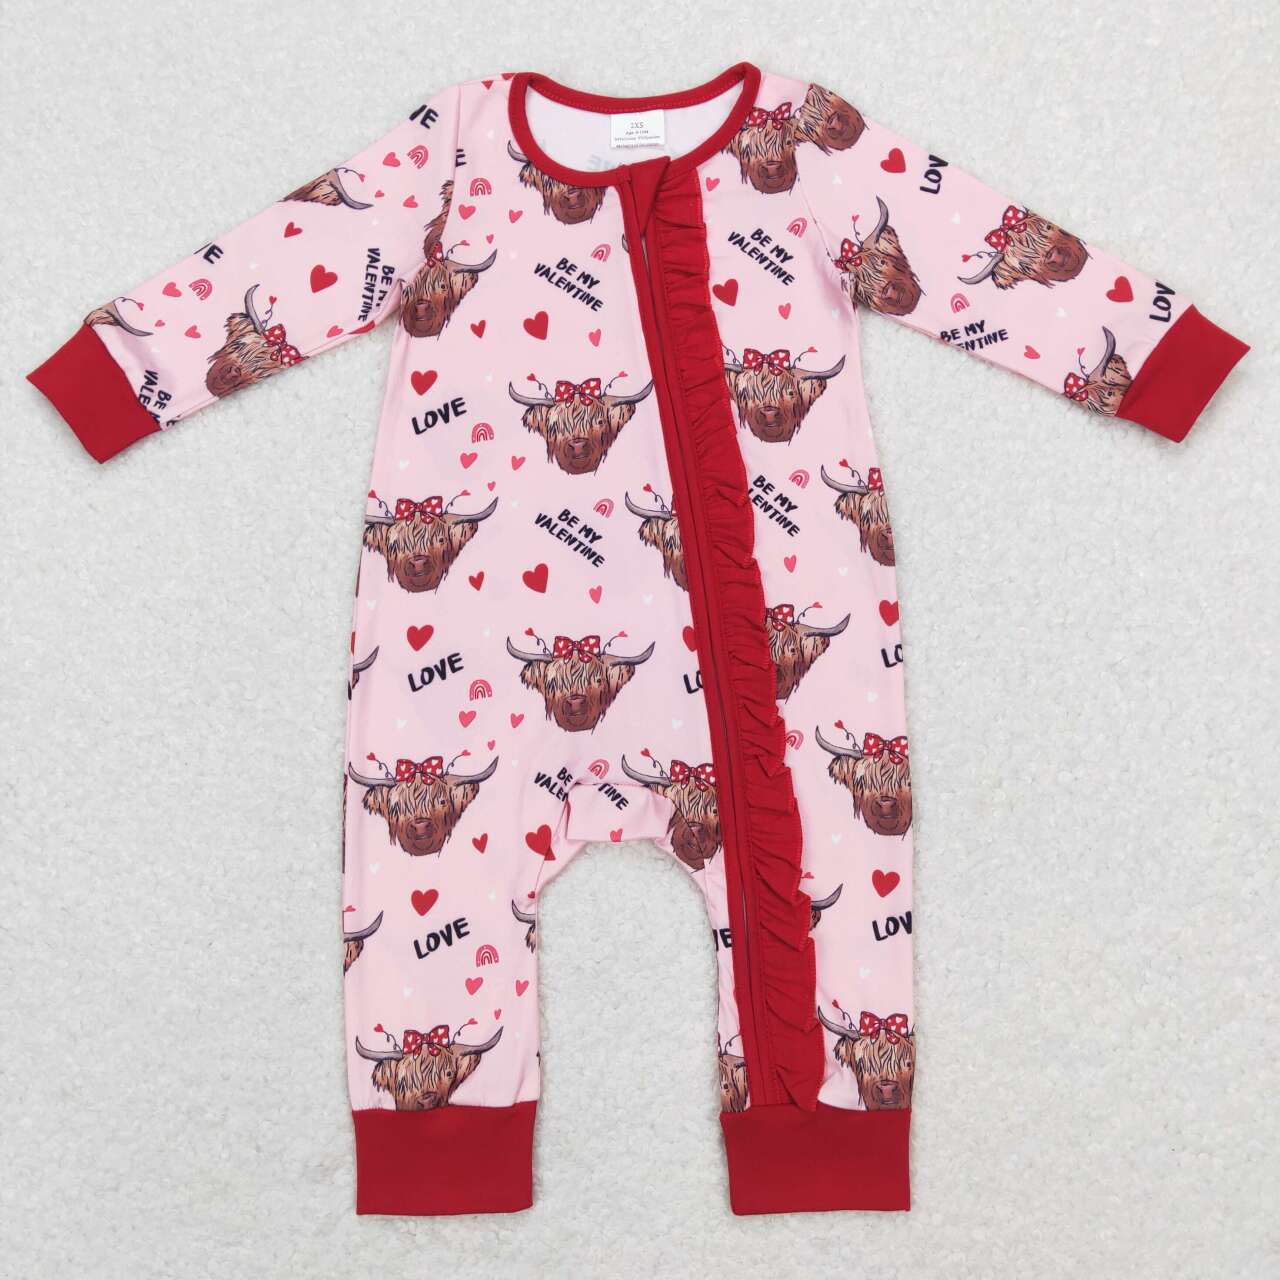 Highland Cow Heart Love Print Girls Valentine's Sisters Matching Clothes